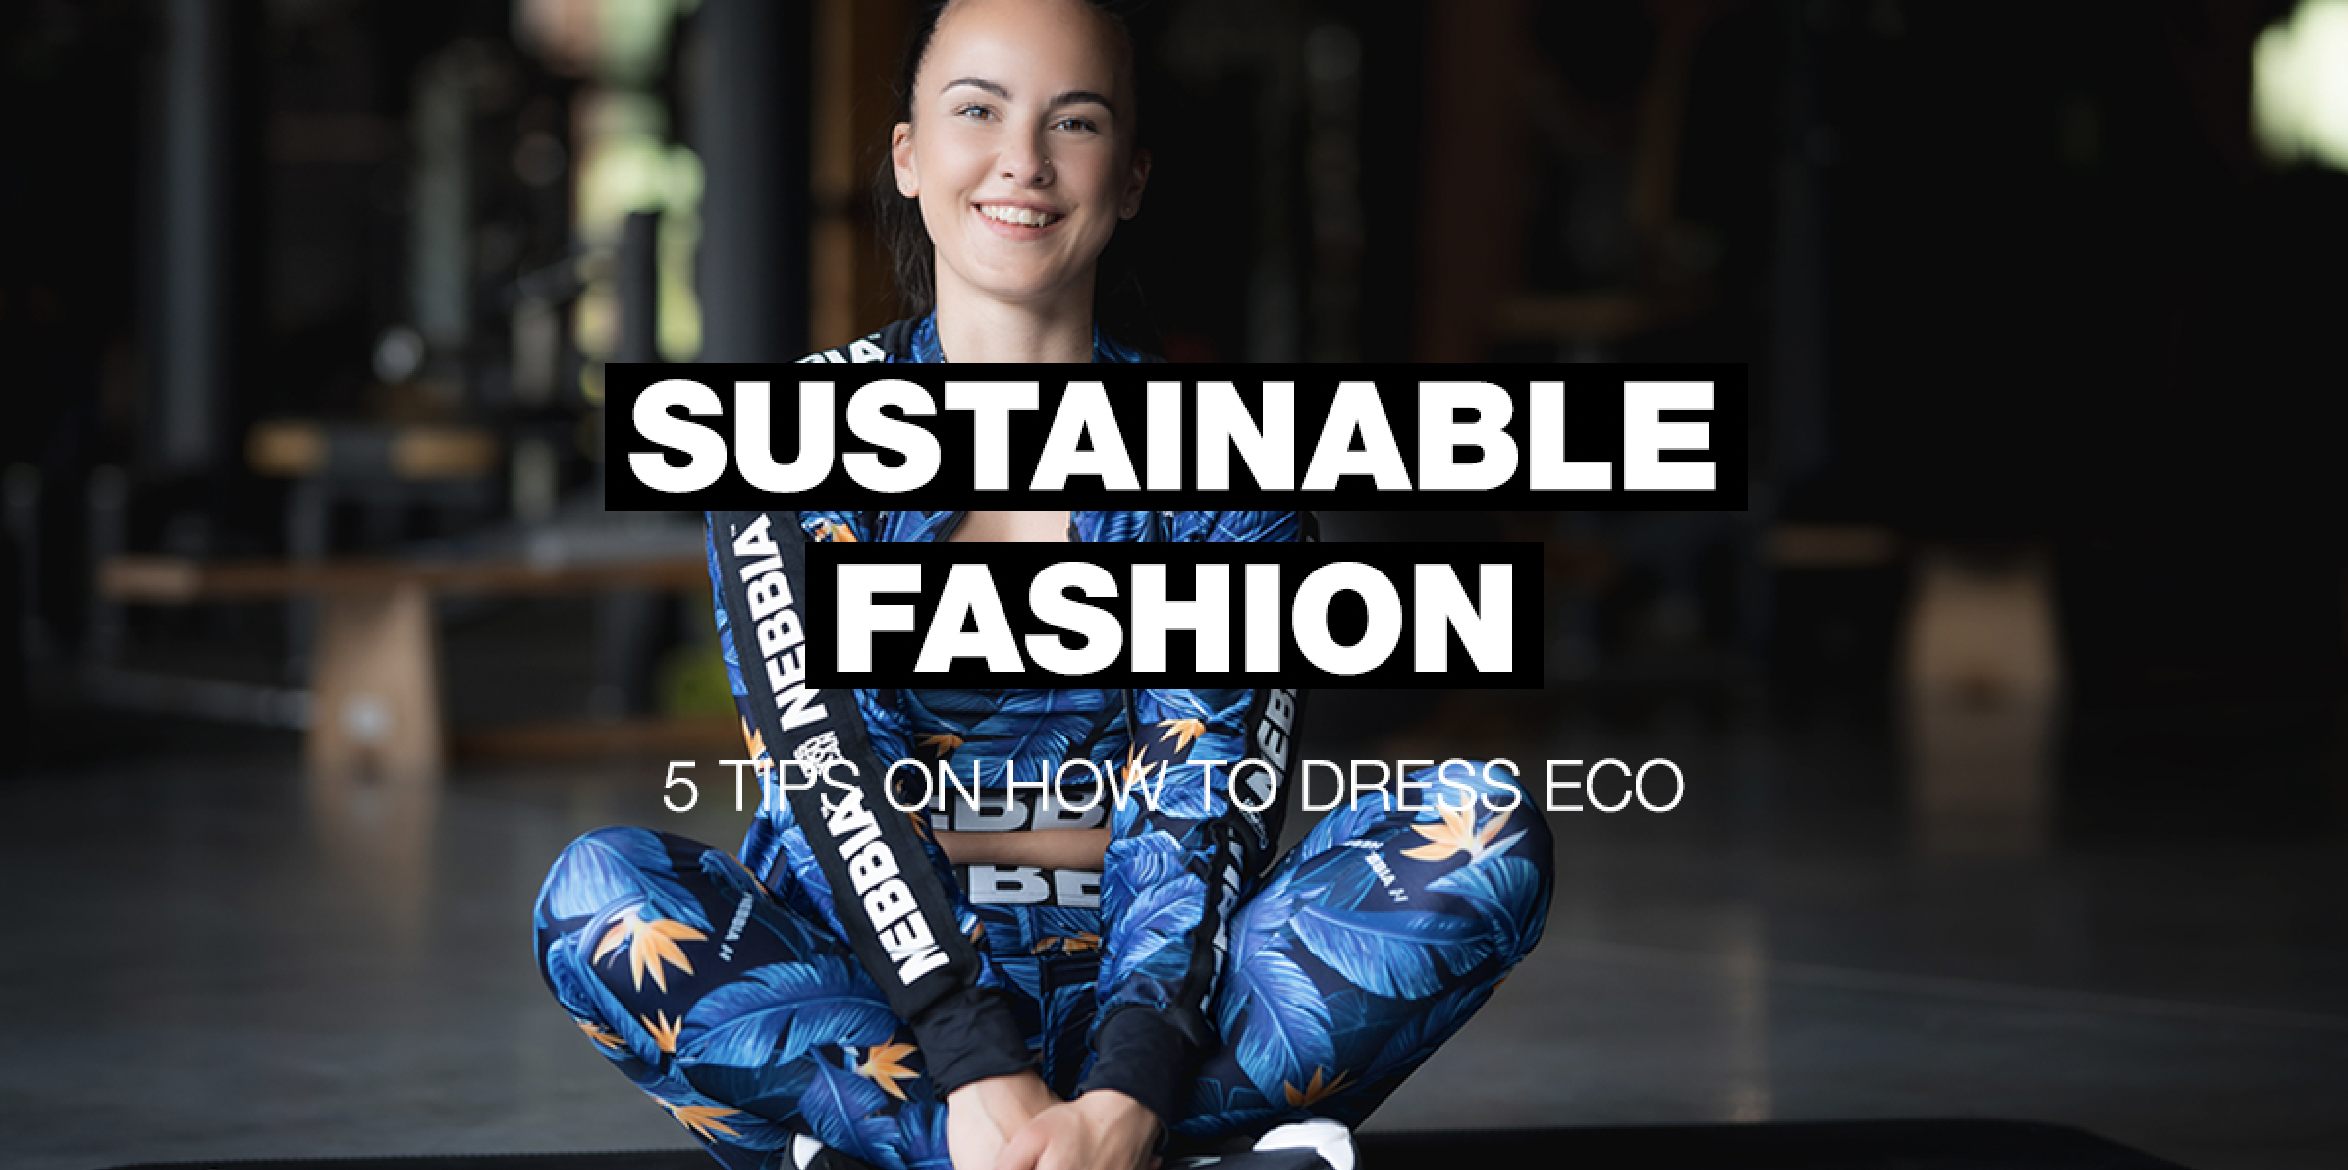 Sustainable fashion: 5 tips on how to dress eco